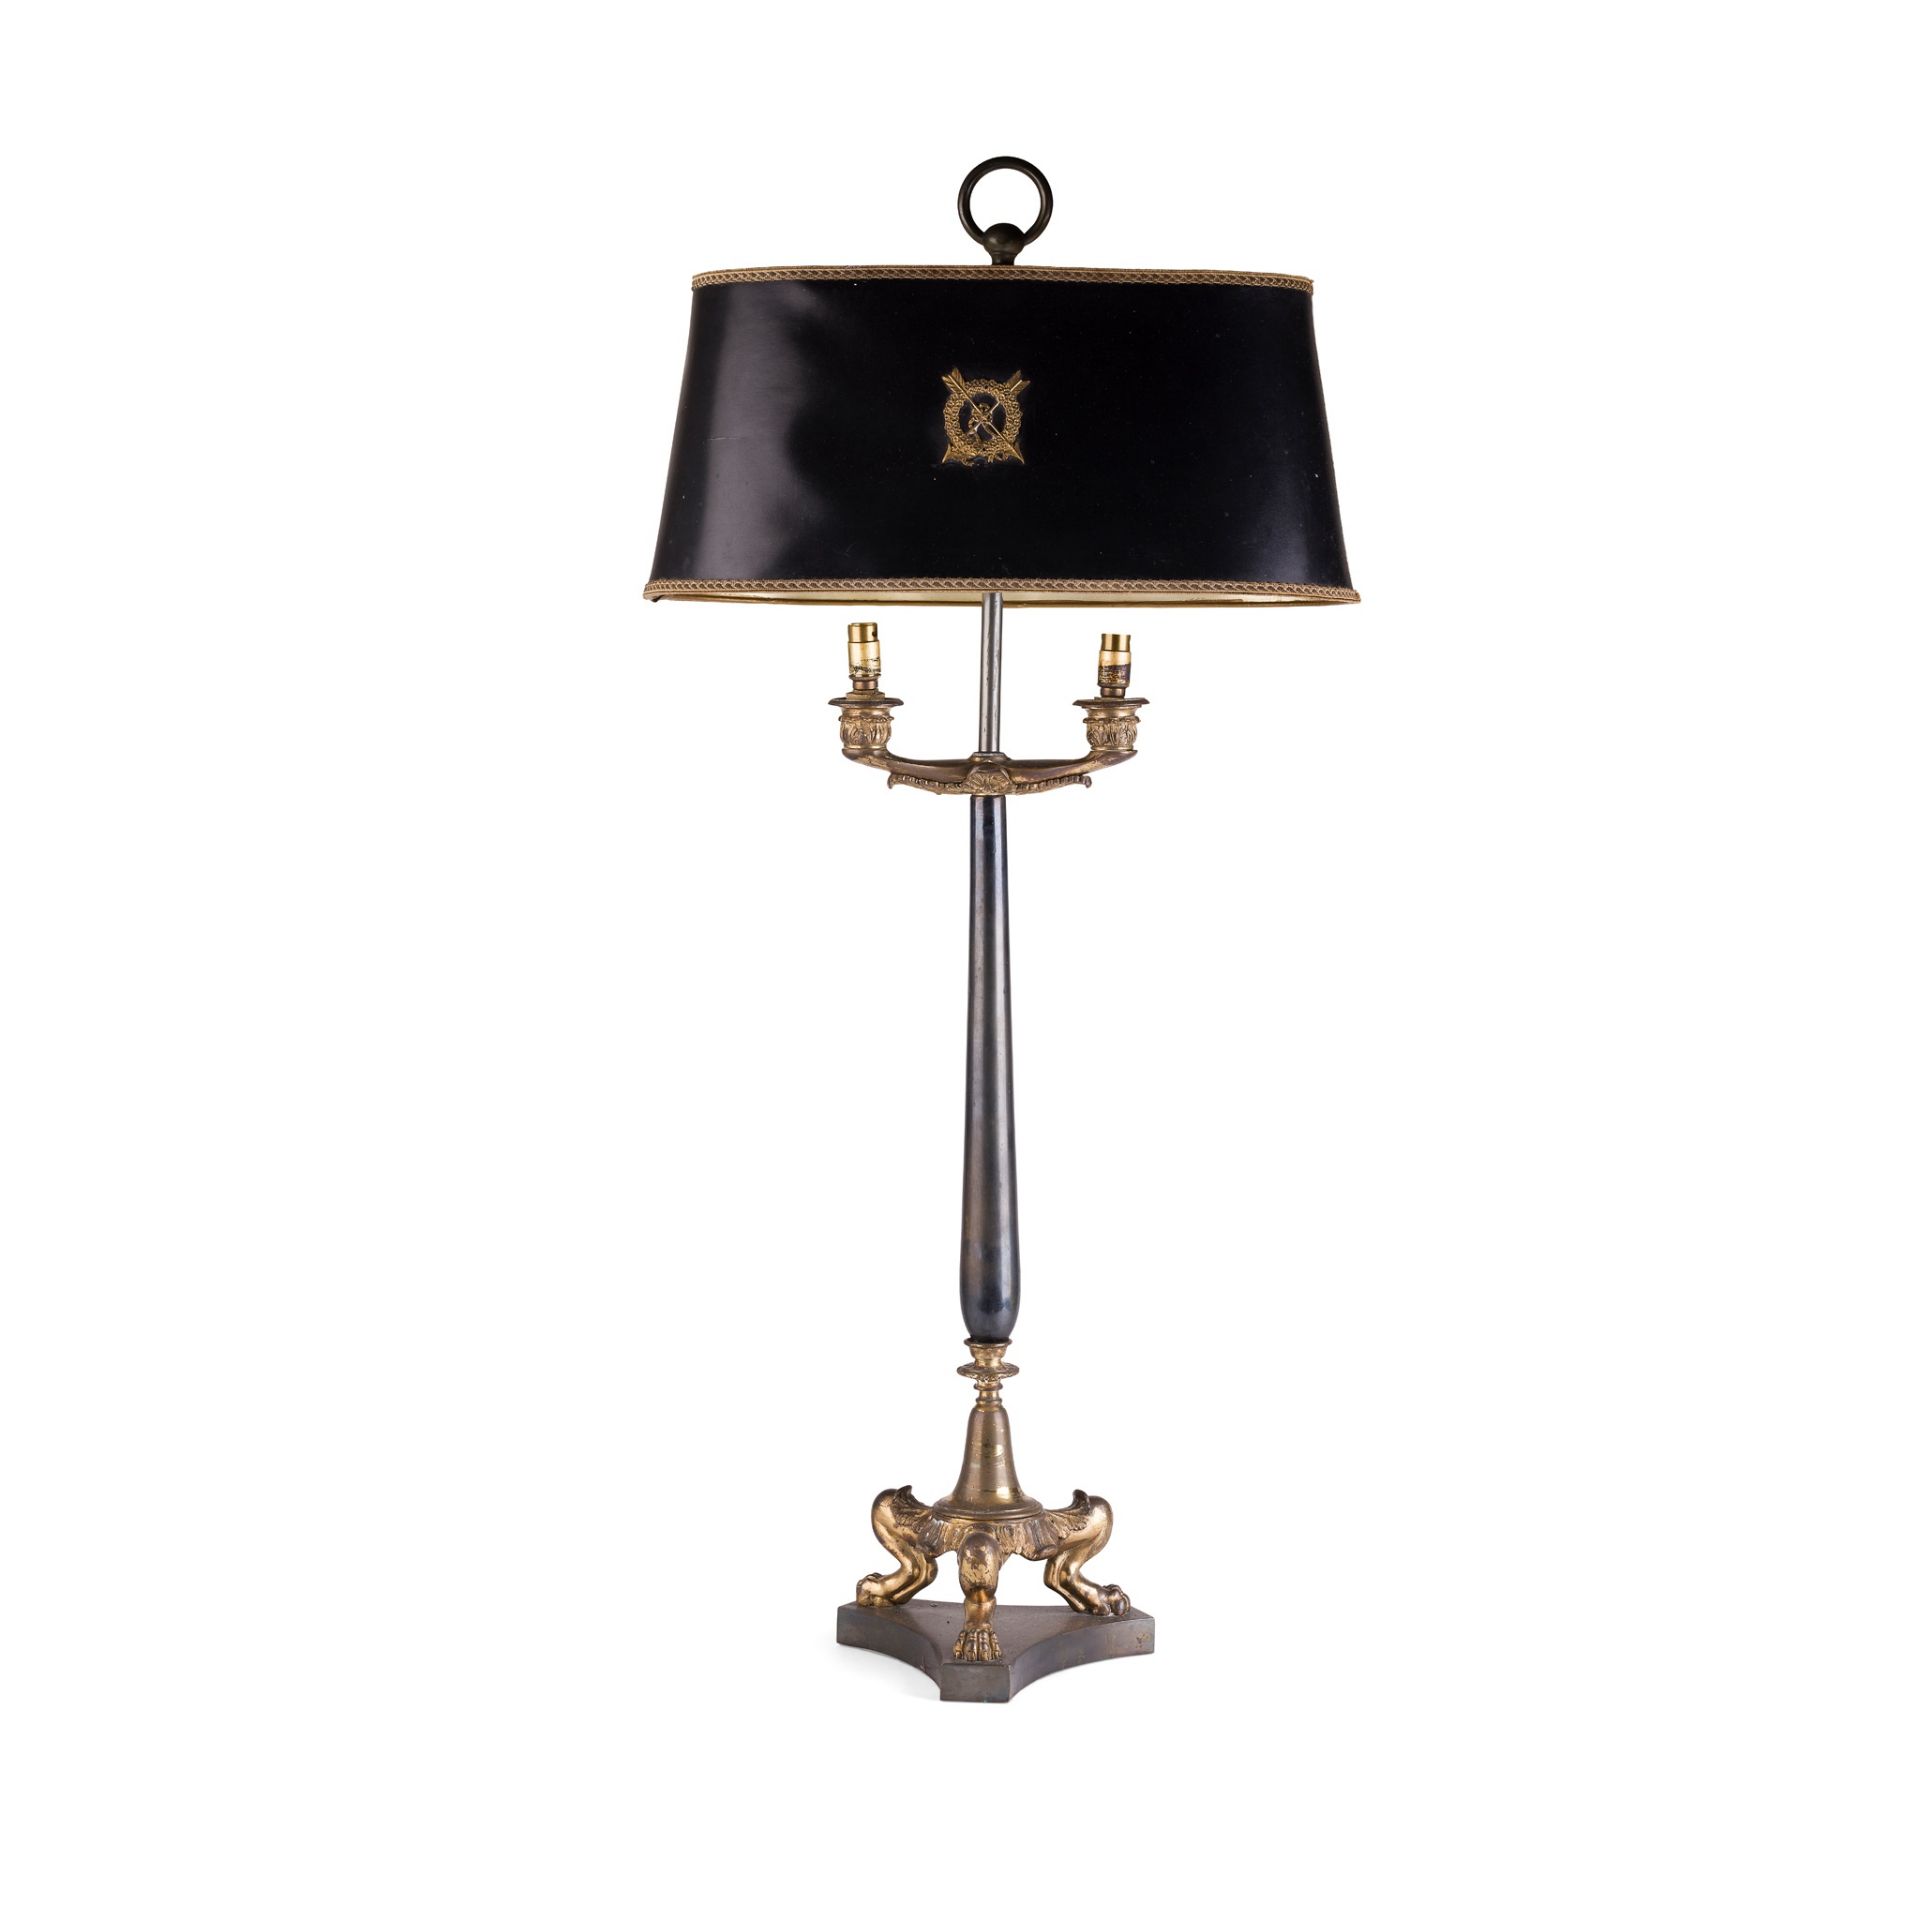 PAIR OF FRENCH PATINATED AND GILT BRONZE TABLE LAMPS 19TH CENTURY - Image 2 of 2